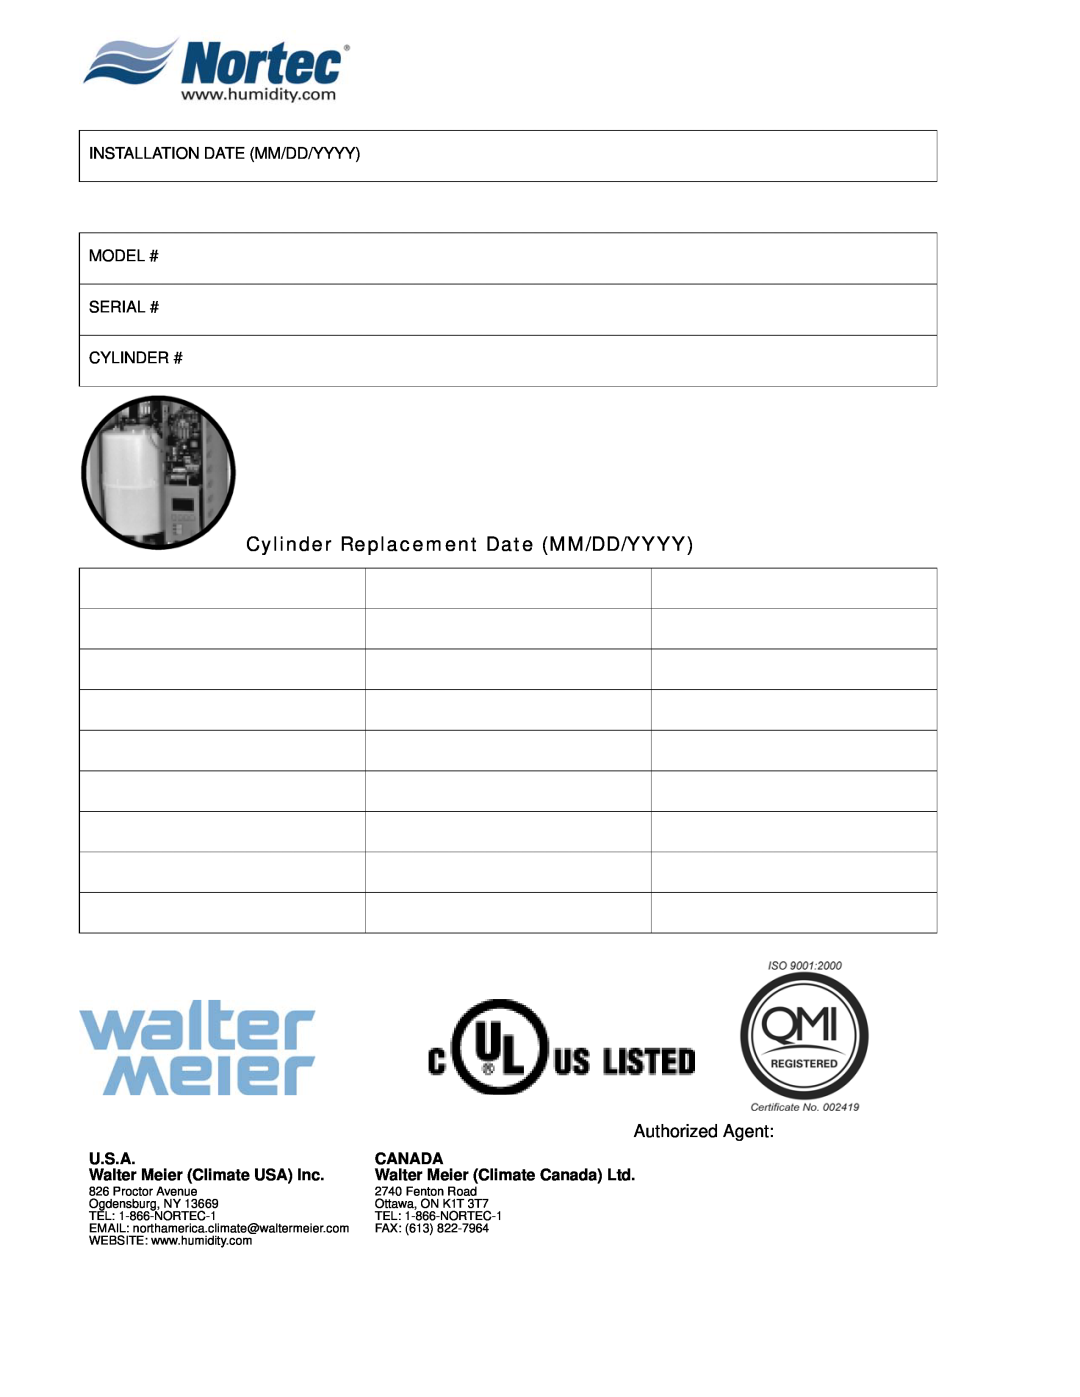 Nortec NH Series Cylinder Replacement Date MM/DD/YYYY, U.S.A, Canada, Walter Meier Climate USA Inc, Proctor Avenue 